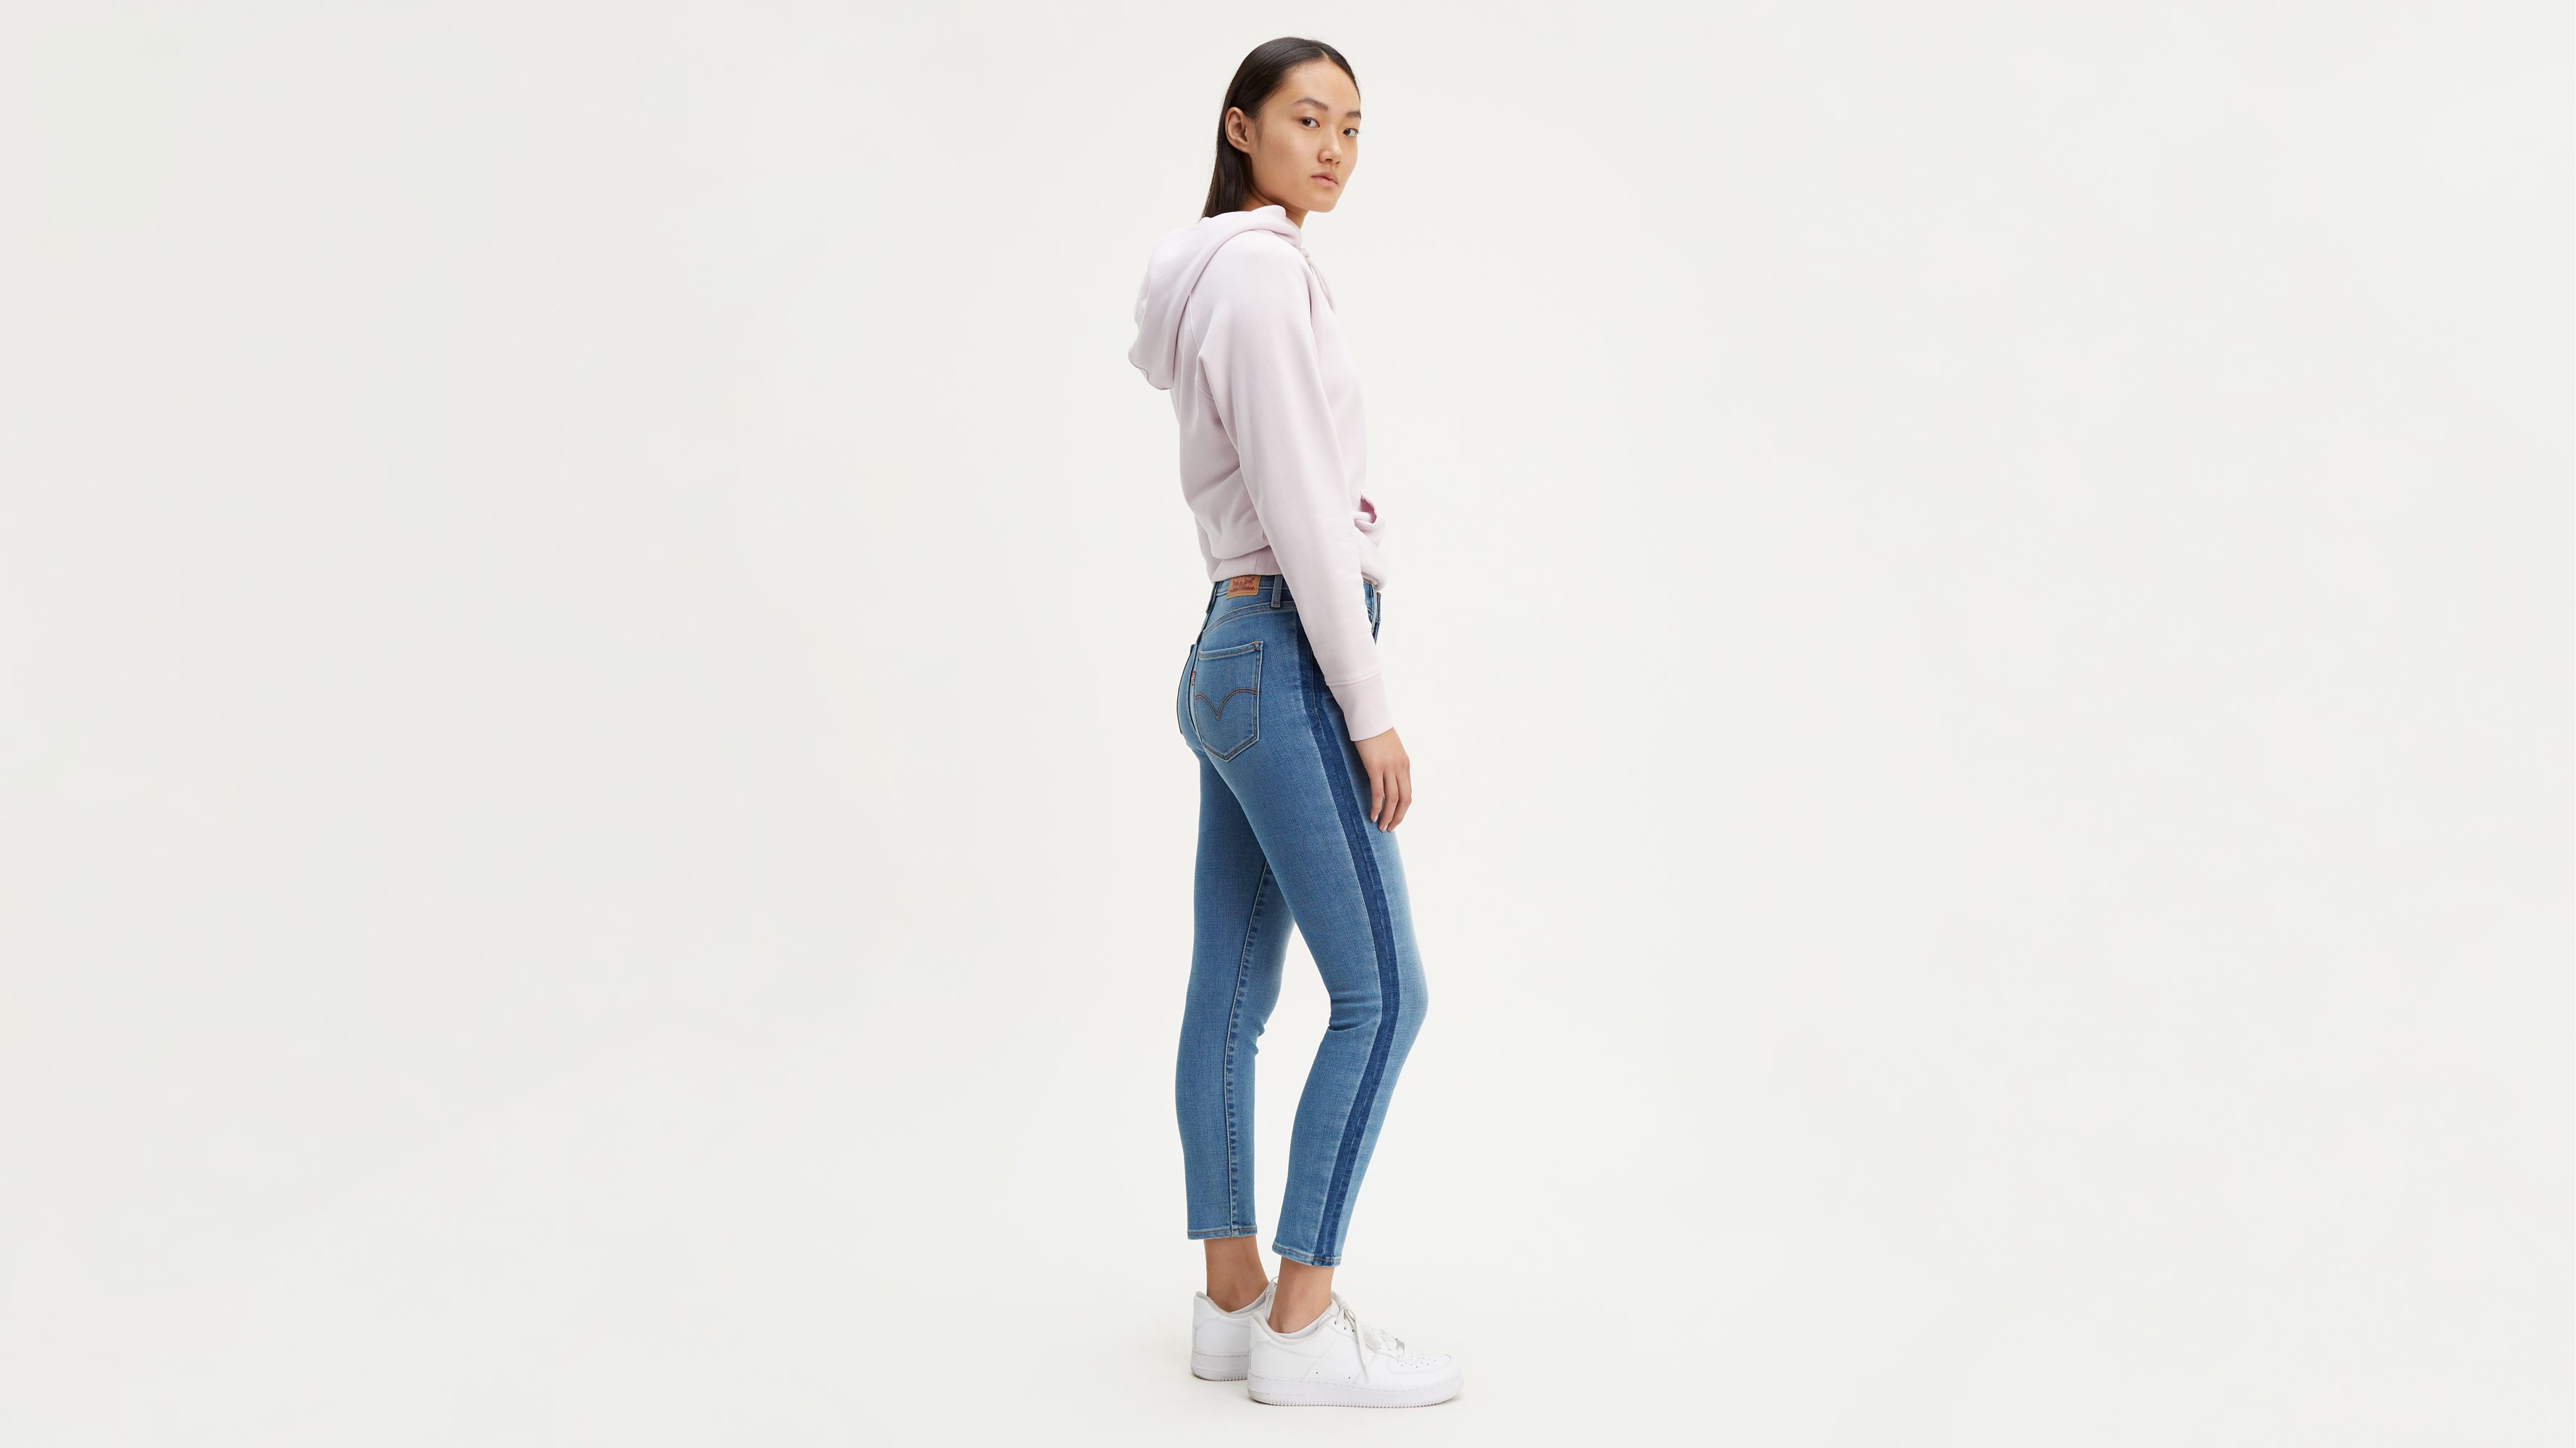 311 shaping ankle skinny jeans